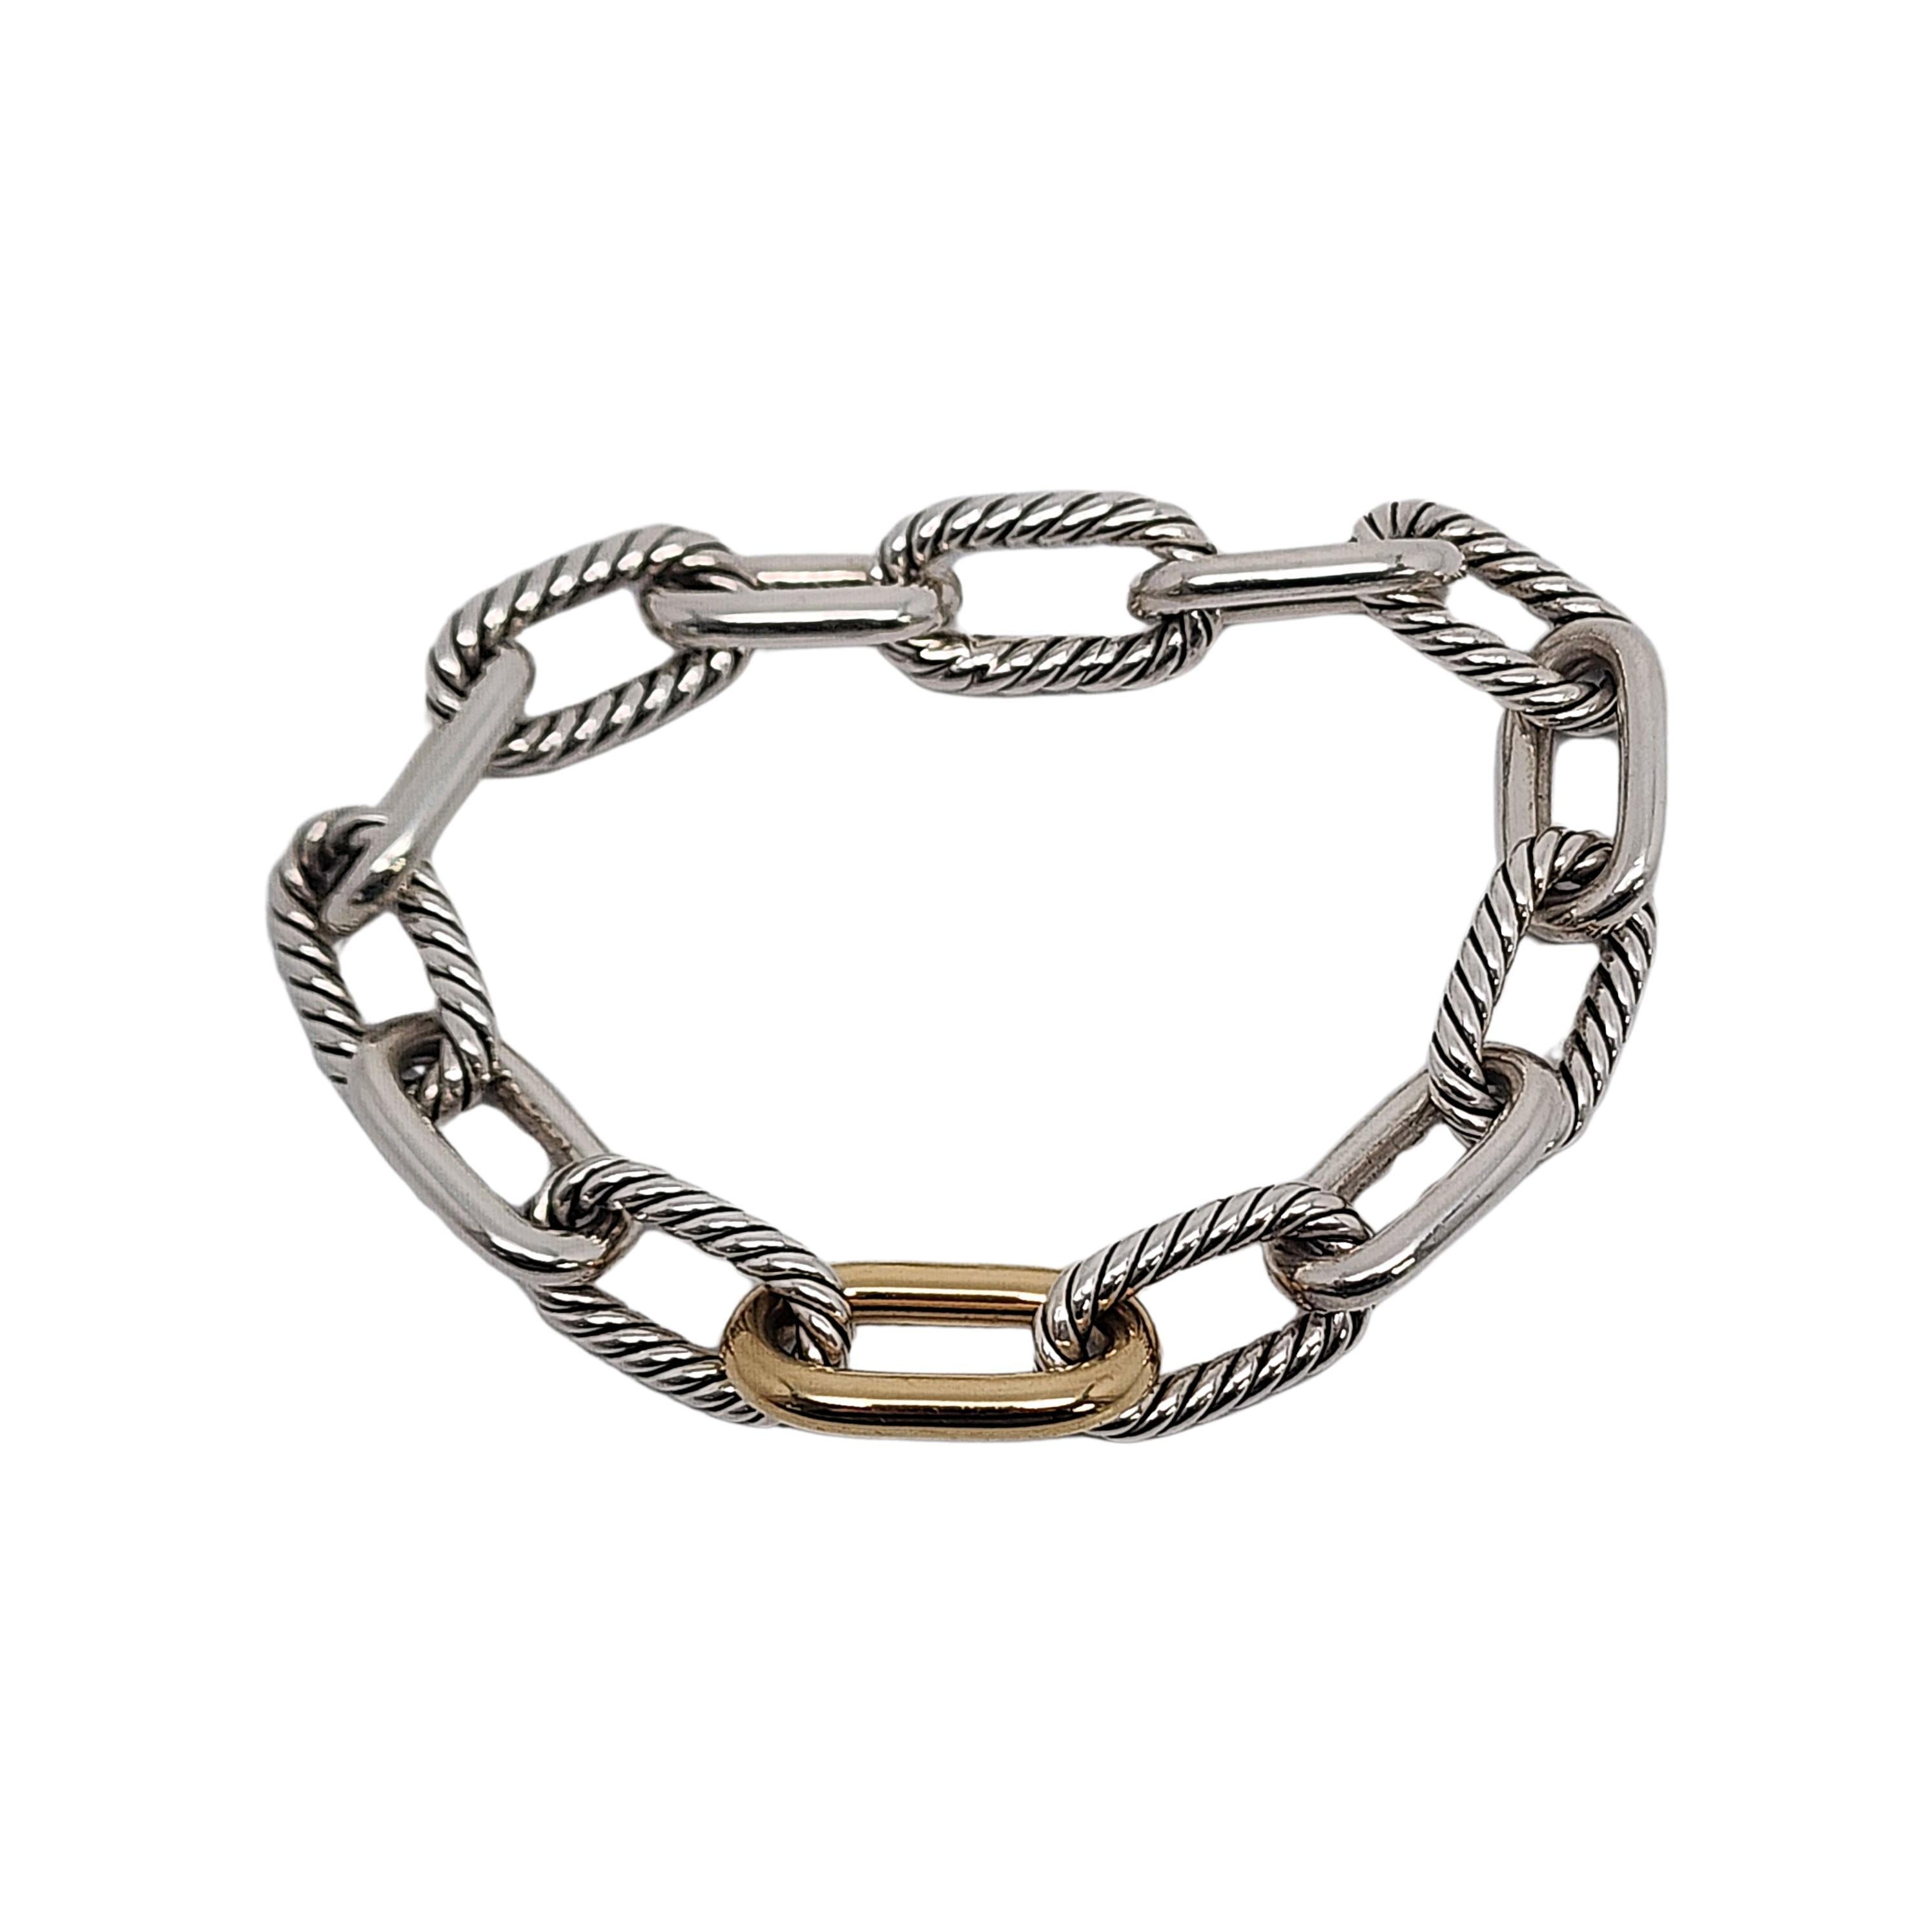 Sterling silver and 18K yellow gold plated oval link bracelet by David Yurman, with box and pouch.

This 11mm link bracelet features alternating textured and smooth sterling silver oval links and one smooth gold plated oval link at its center. The